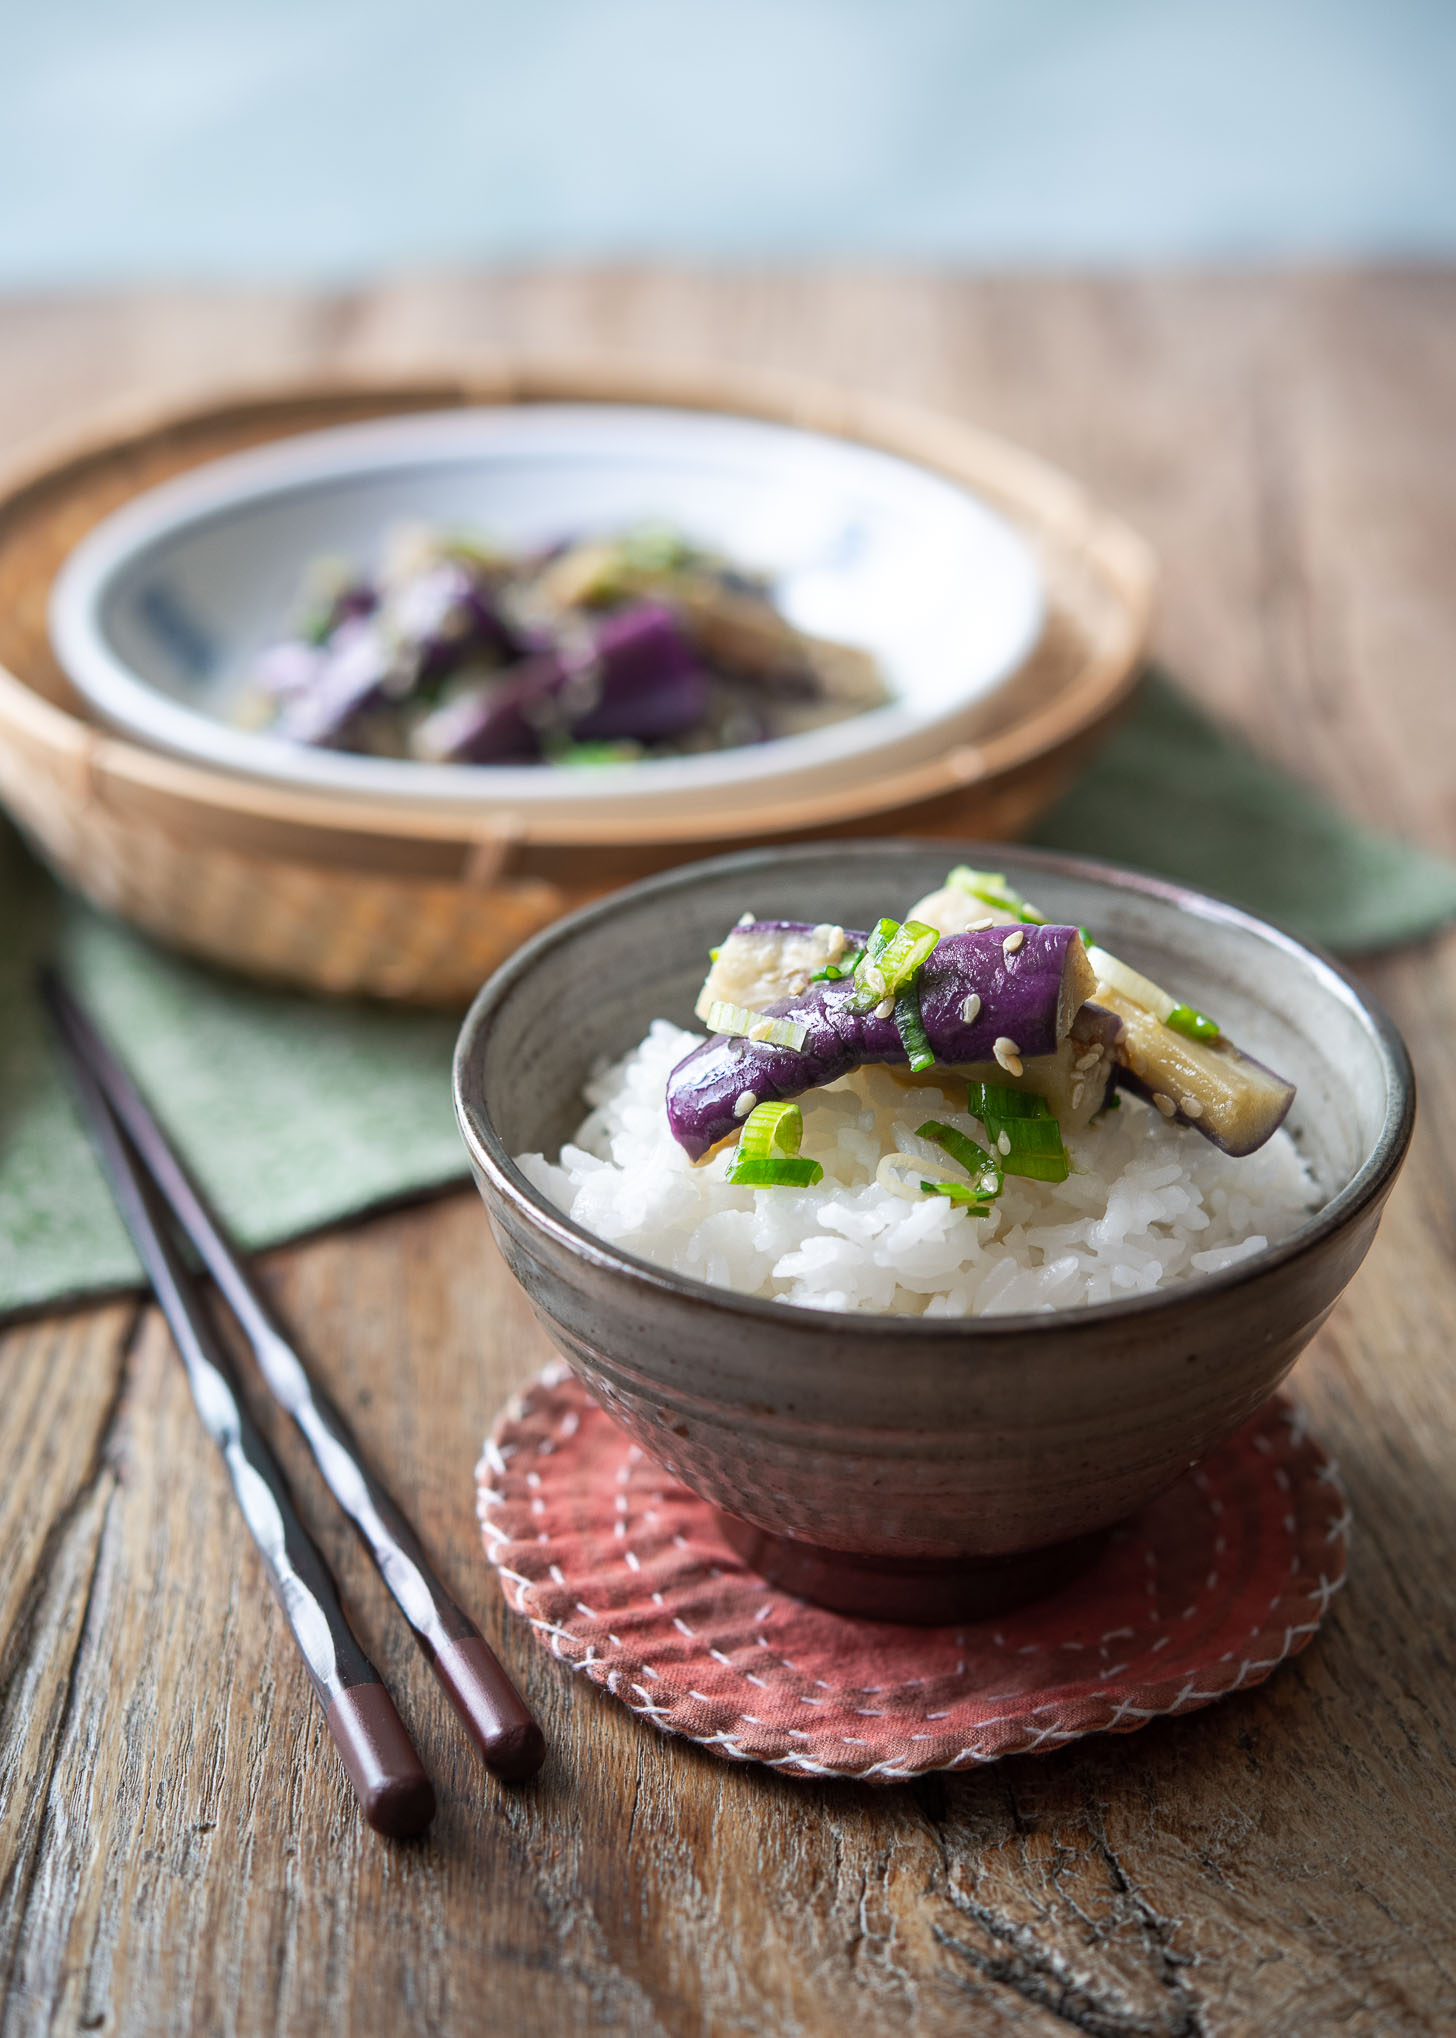 Korean eggplant side dish is served over a bowl of rice.